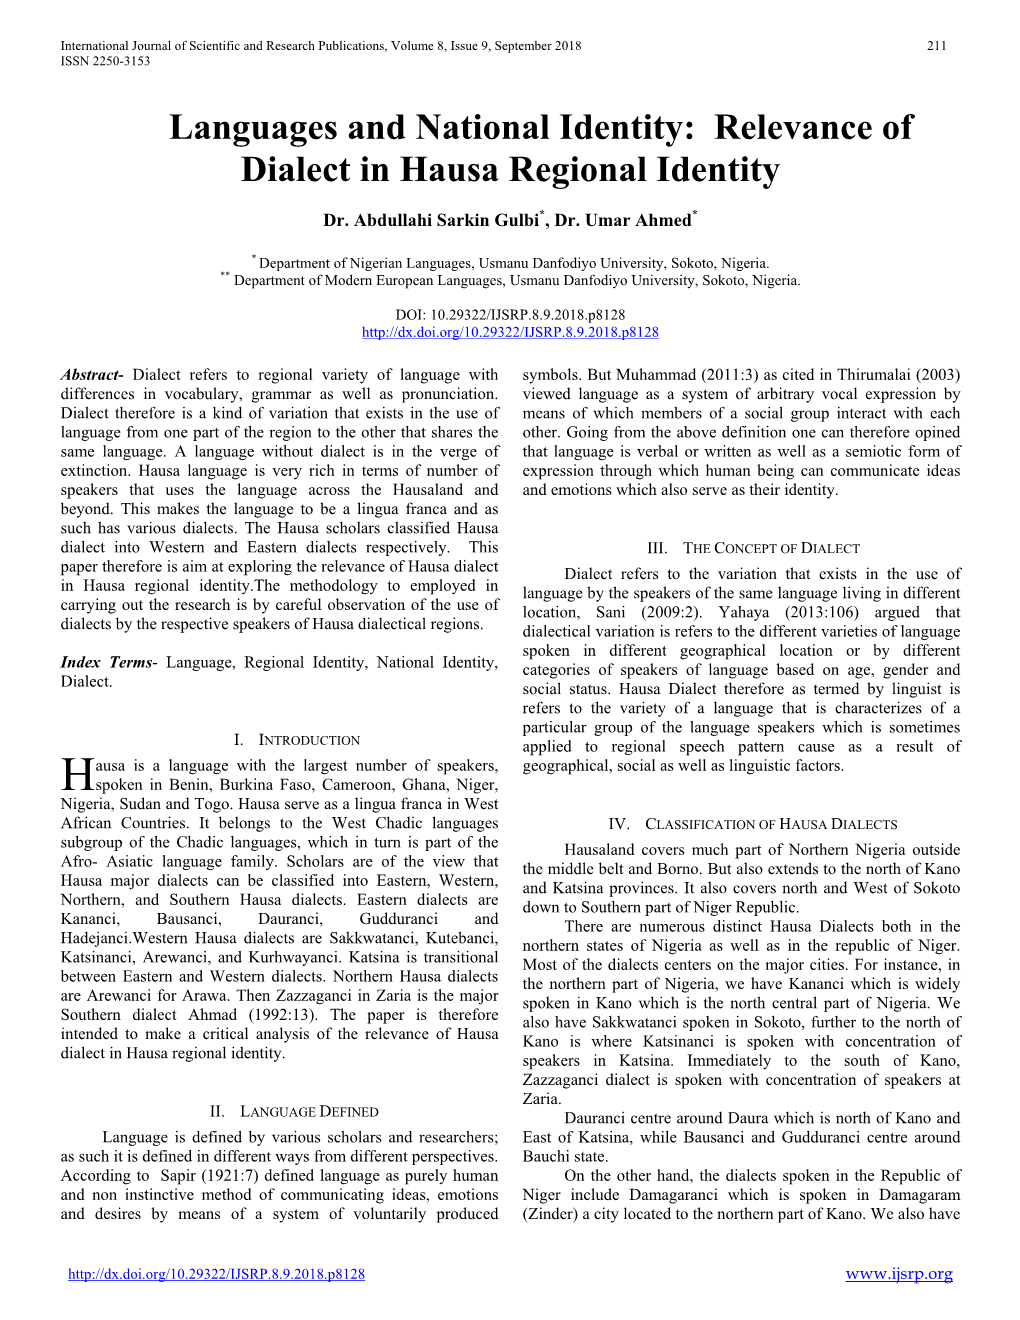 Relevance of Dialect in Hausa Regional Identity